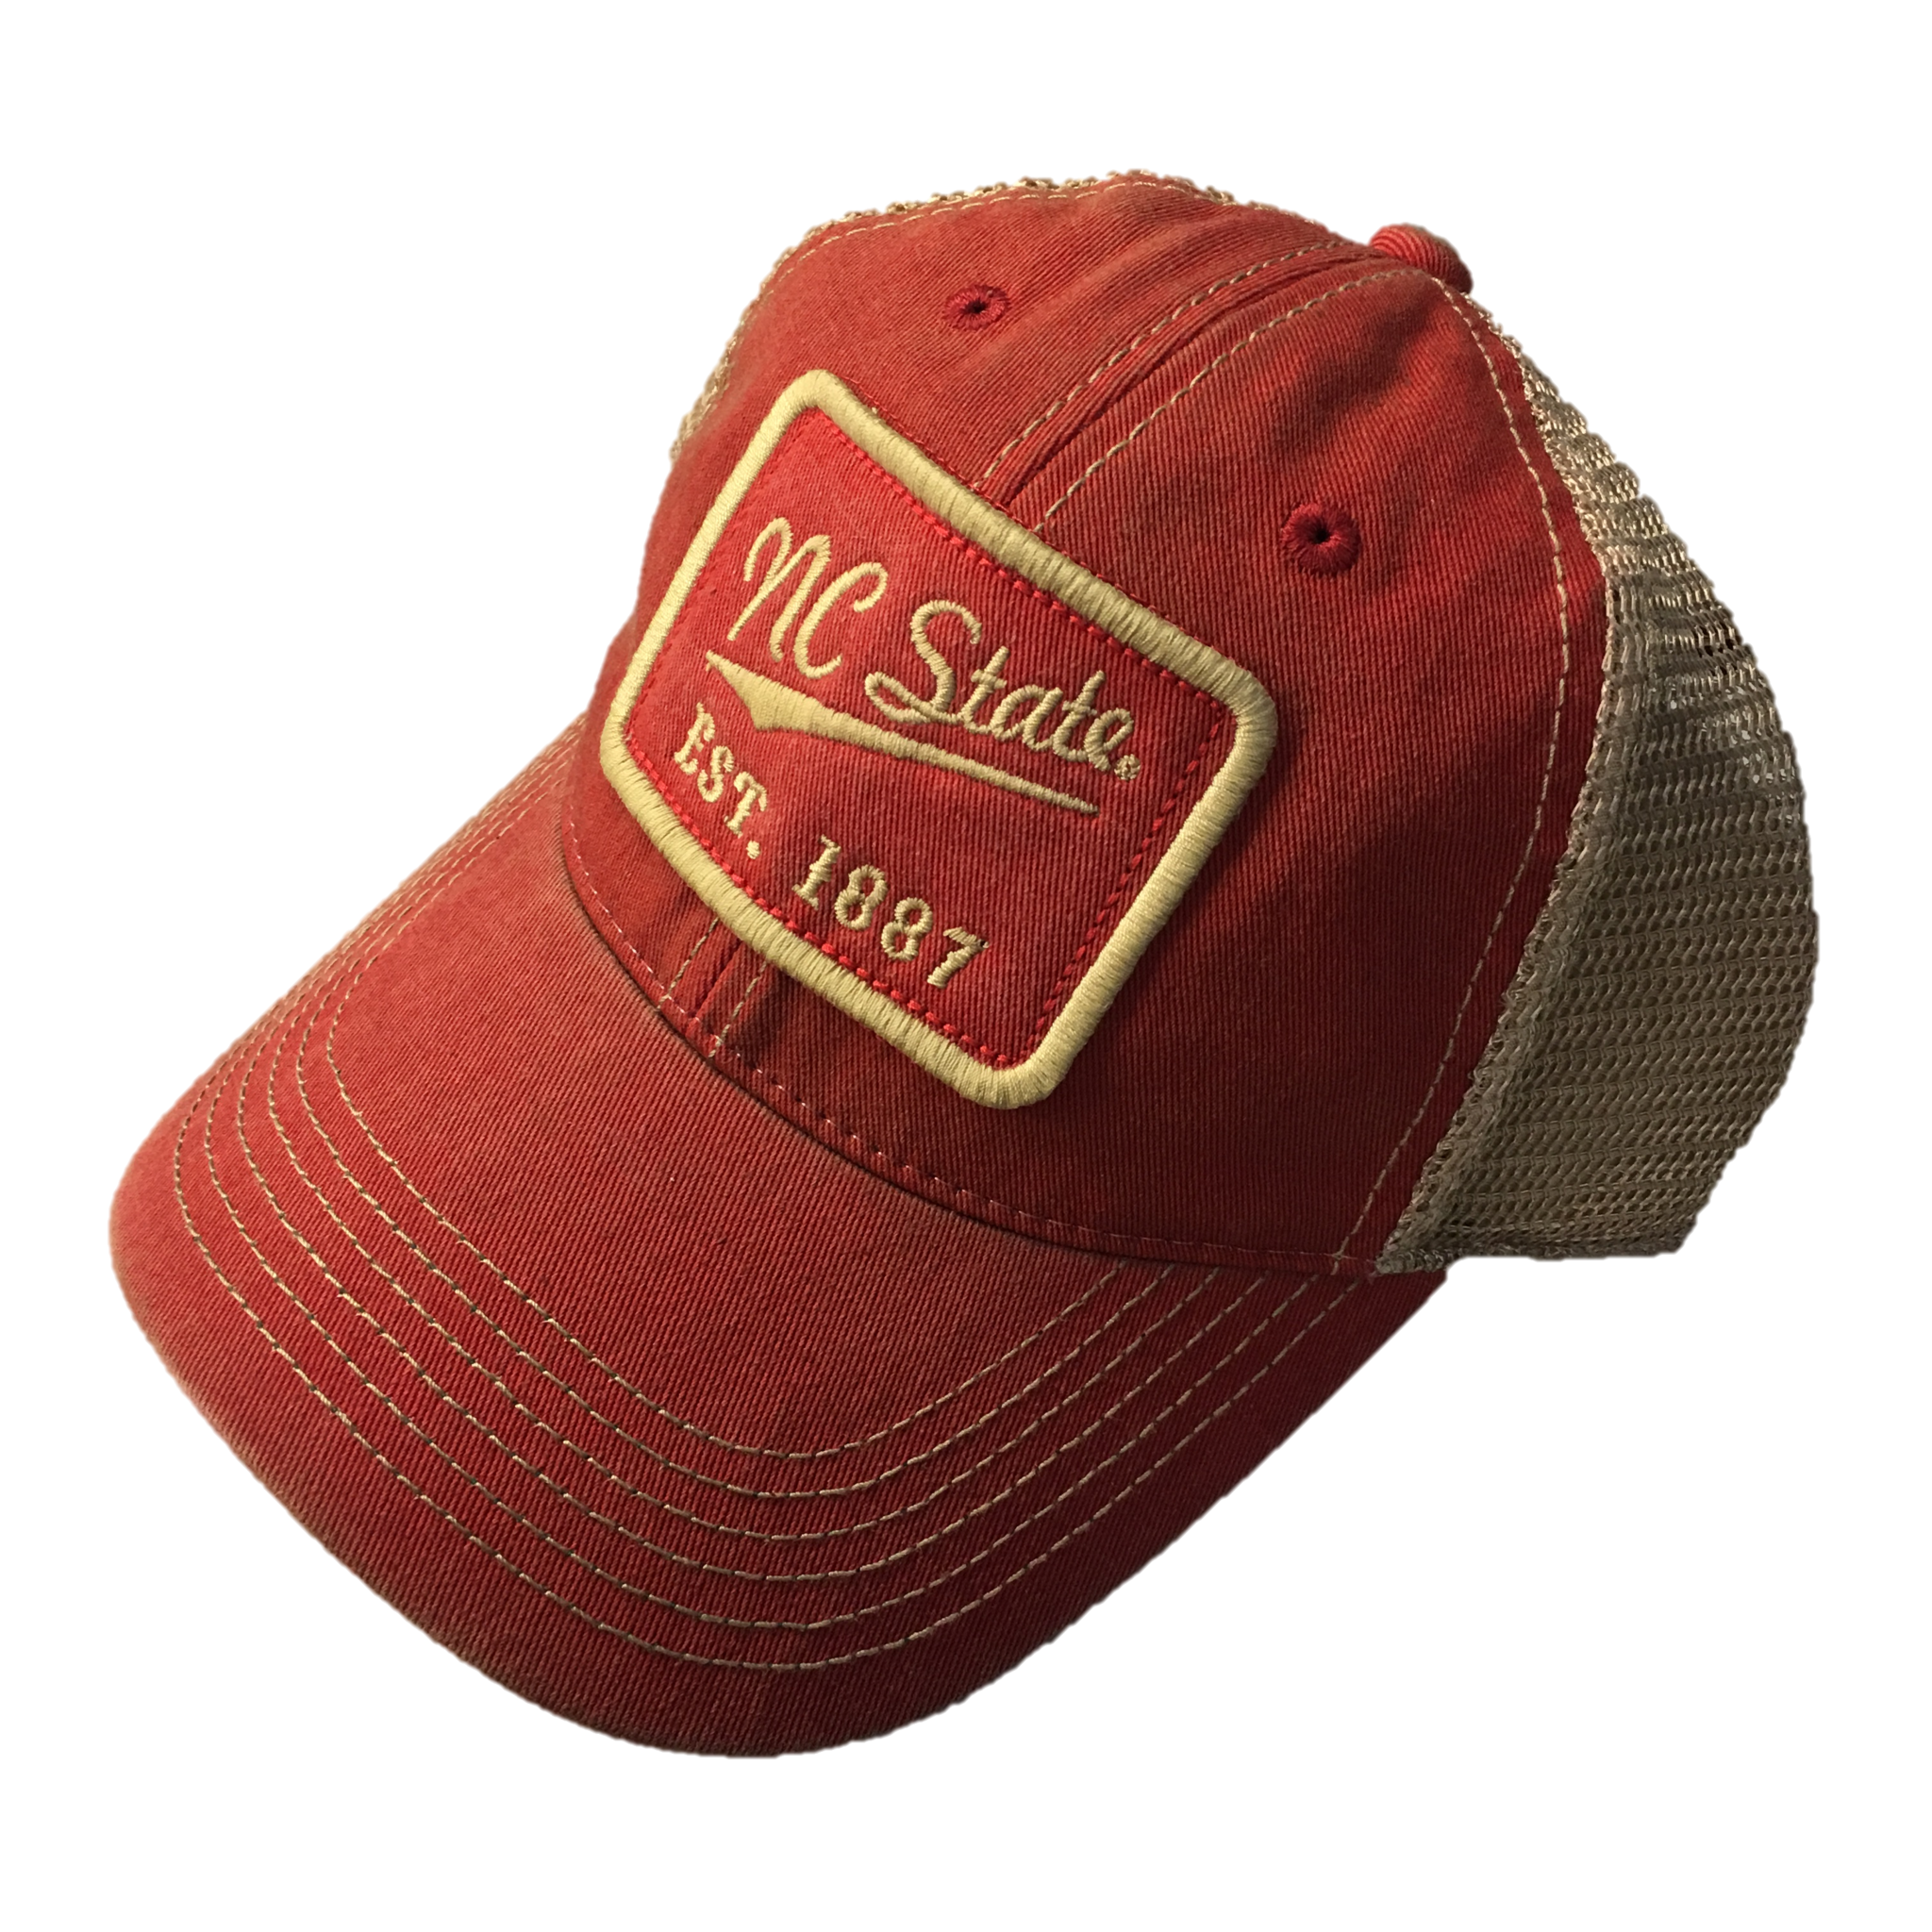 NC State Wolfpack Red Trucker w/ Square Patch Snapback Hat